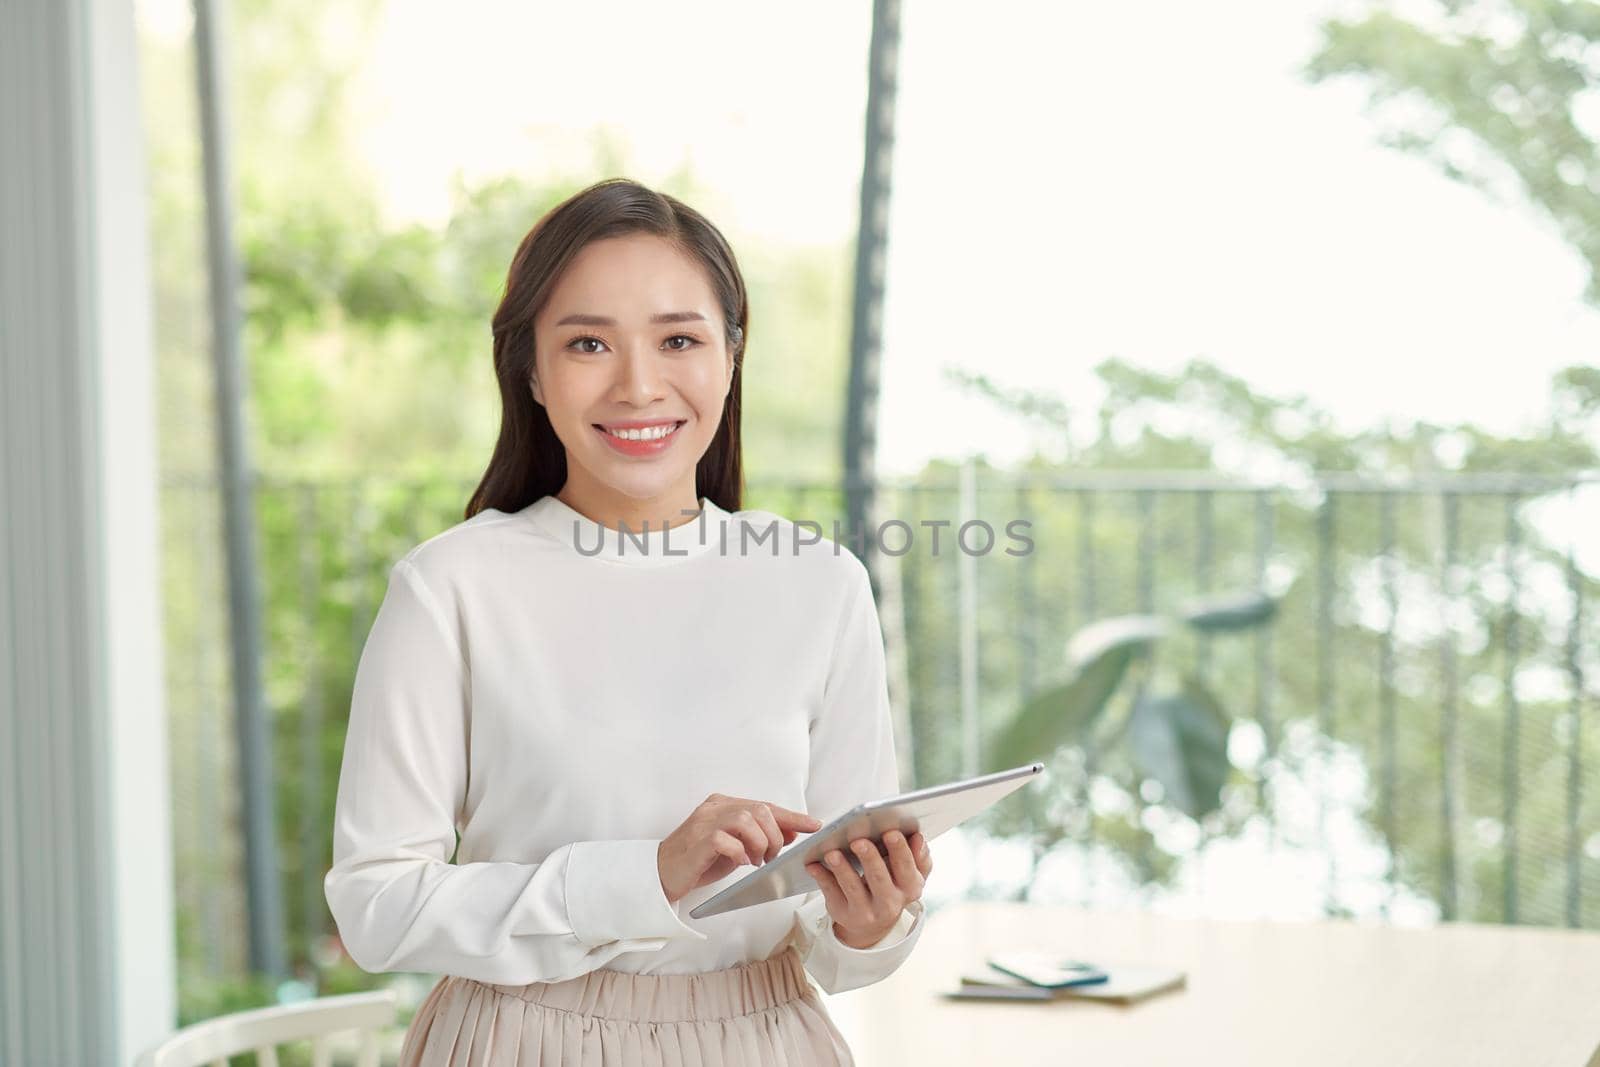 Attractive businesswoman using a digital tablet while standing in front of windows in an office building by makidotvn